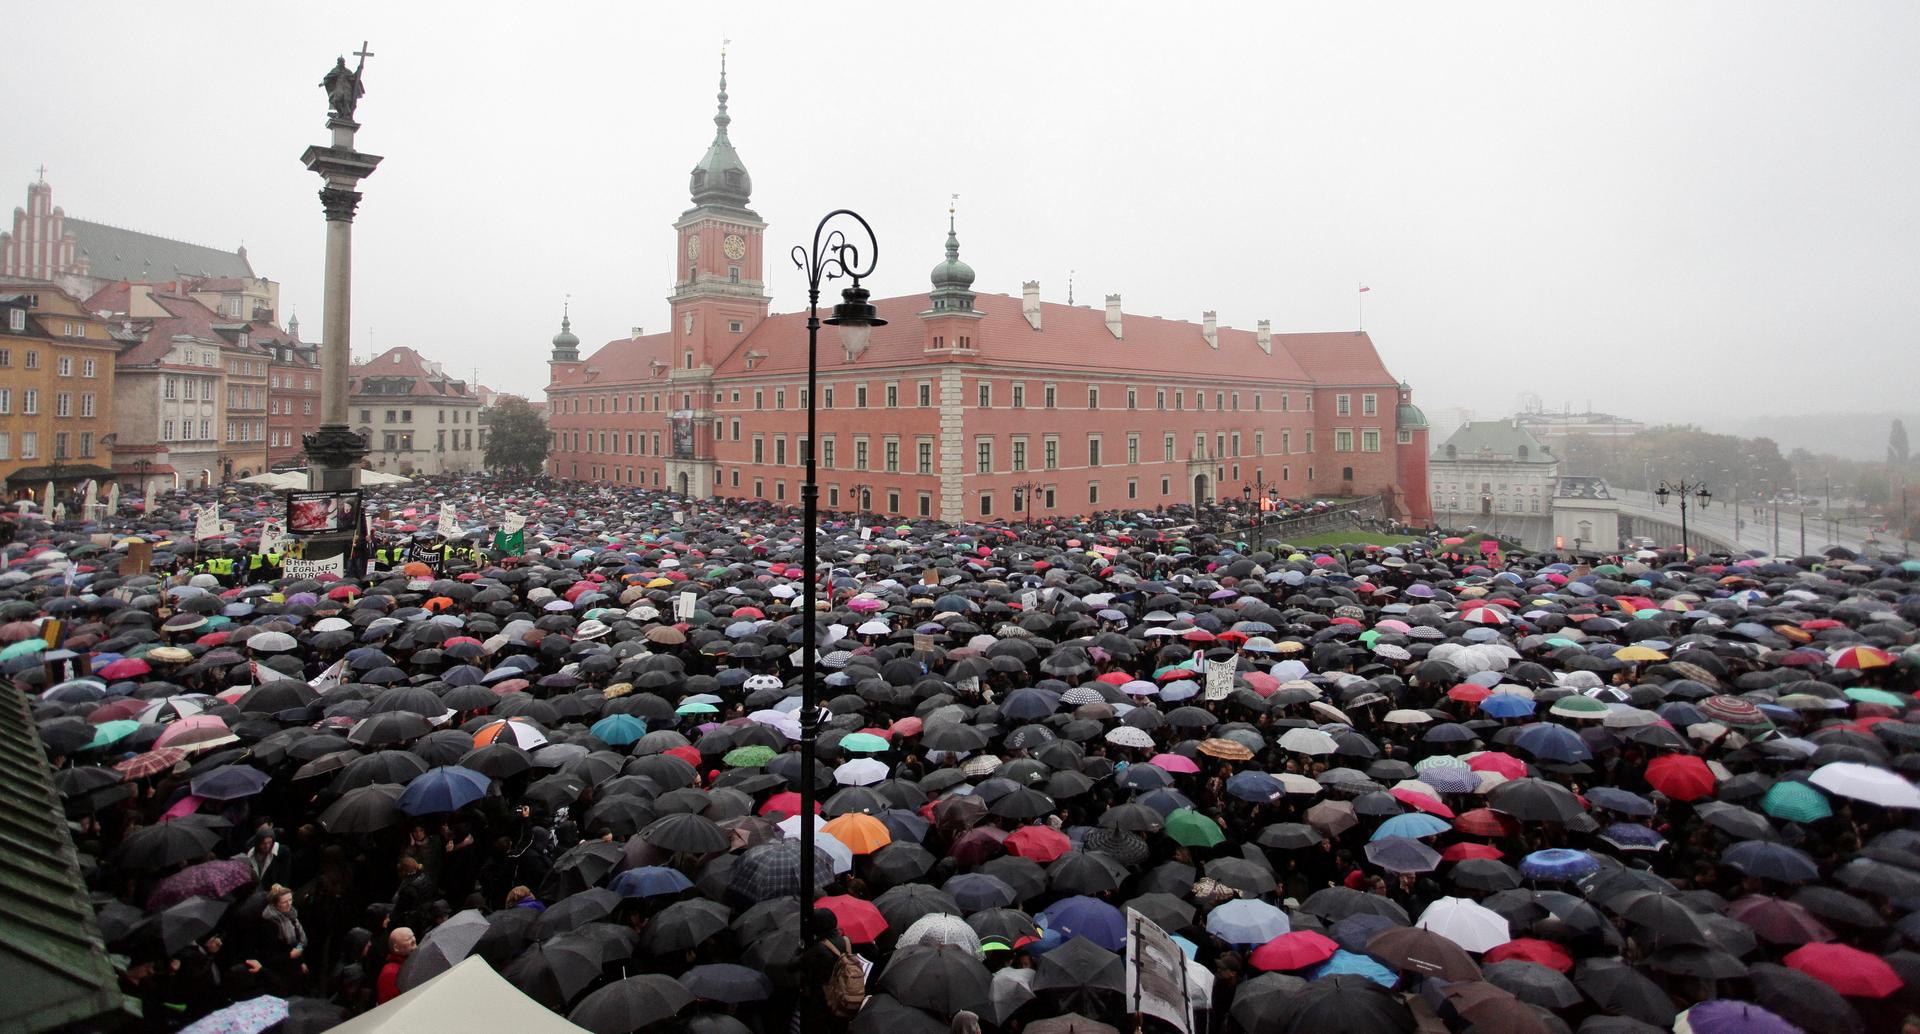 Thousands of people gather during an abortion rights campaigners' demonstration to protest plans for a total ban on abortion in front of the Royal Castle in Warsaw, Poland, on Oct. 3, 2016.